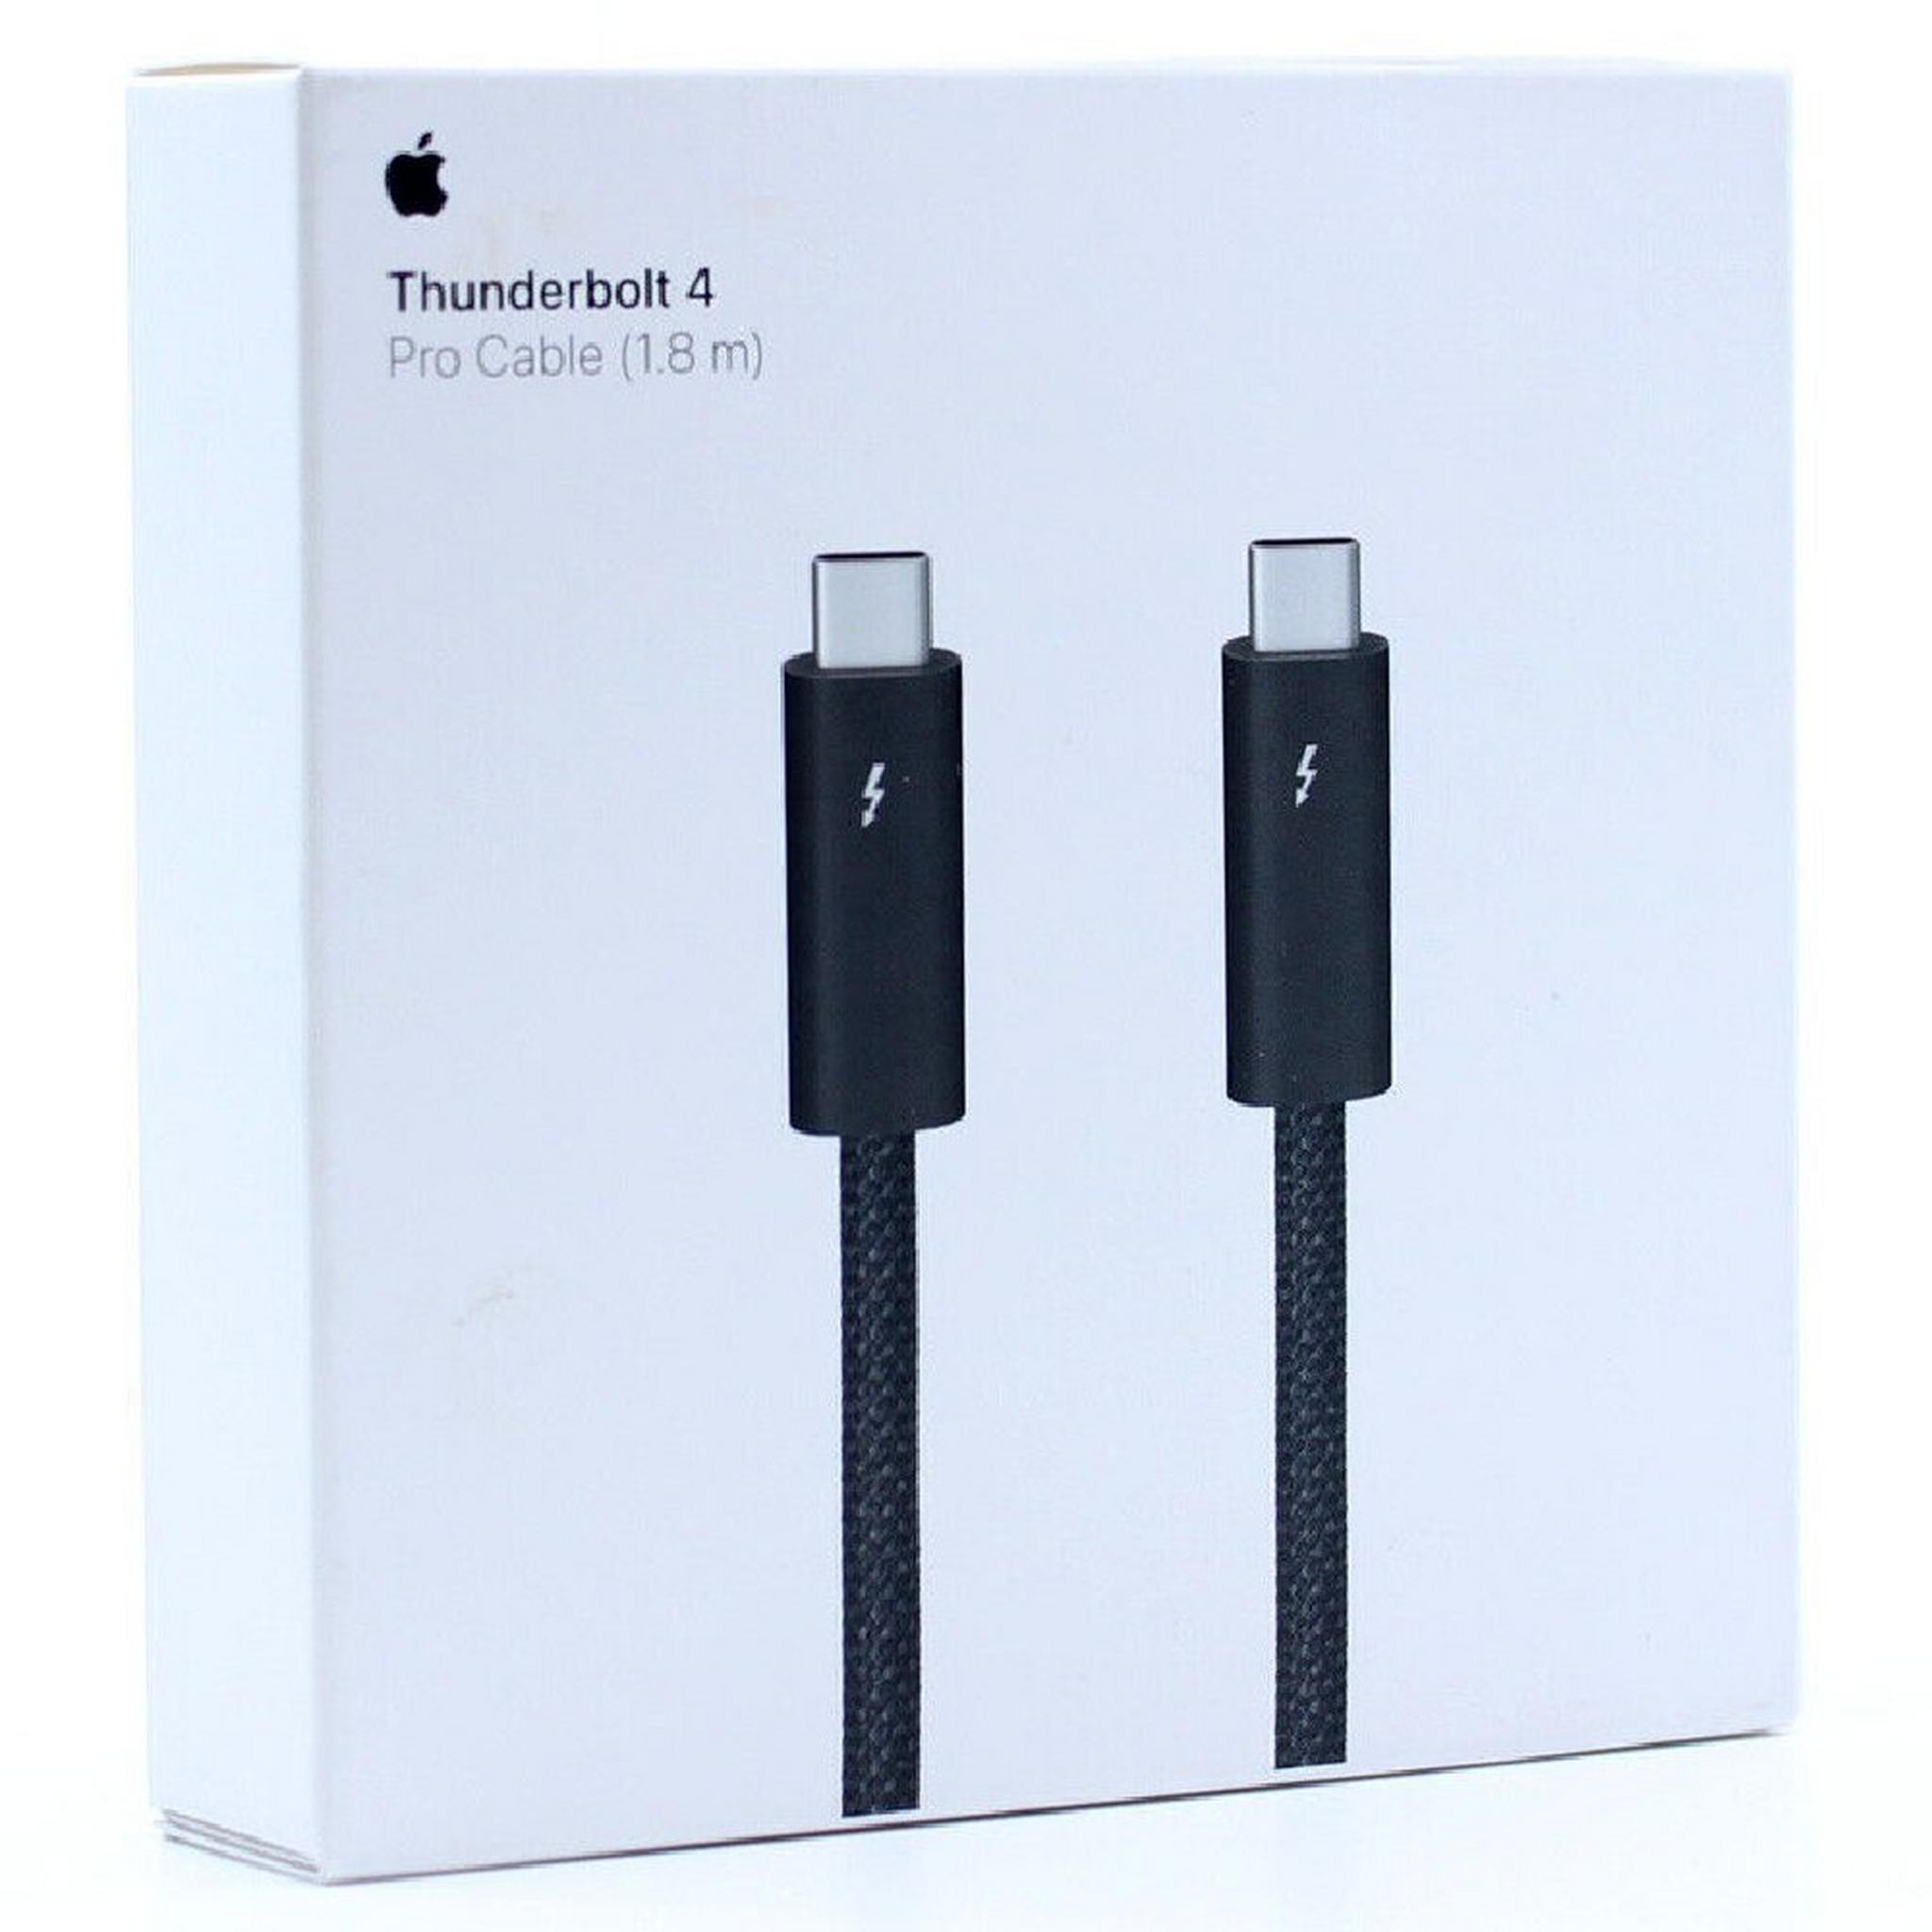 Apple Thunderbolt 4 Pro Cable 1.8m (MN713ZM/A)